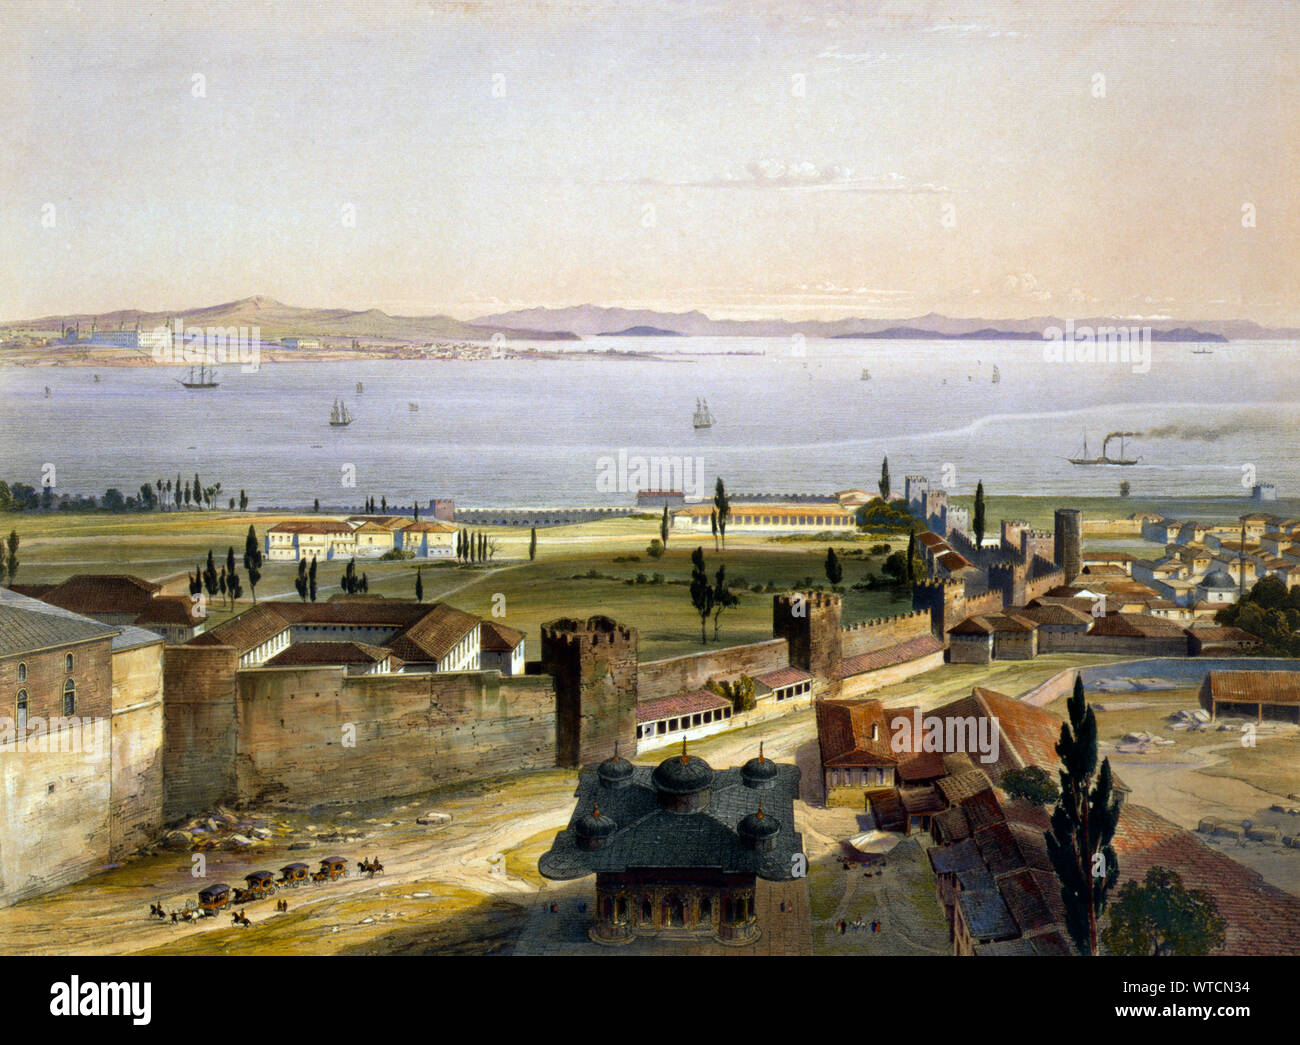 Panorama of Istanbul made from a minaret of Ayasofya Mosque, formerly the Church of Hagia Sophia, including the fountain of Ahmed (Ahmet) III in the f Stock Photo